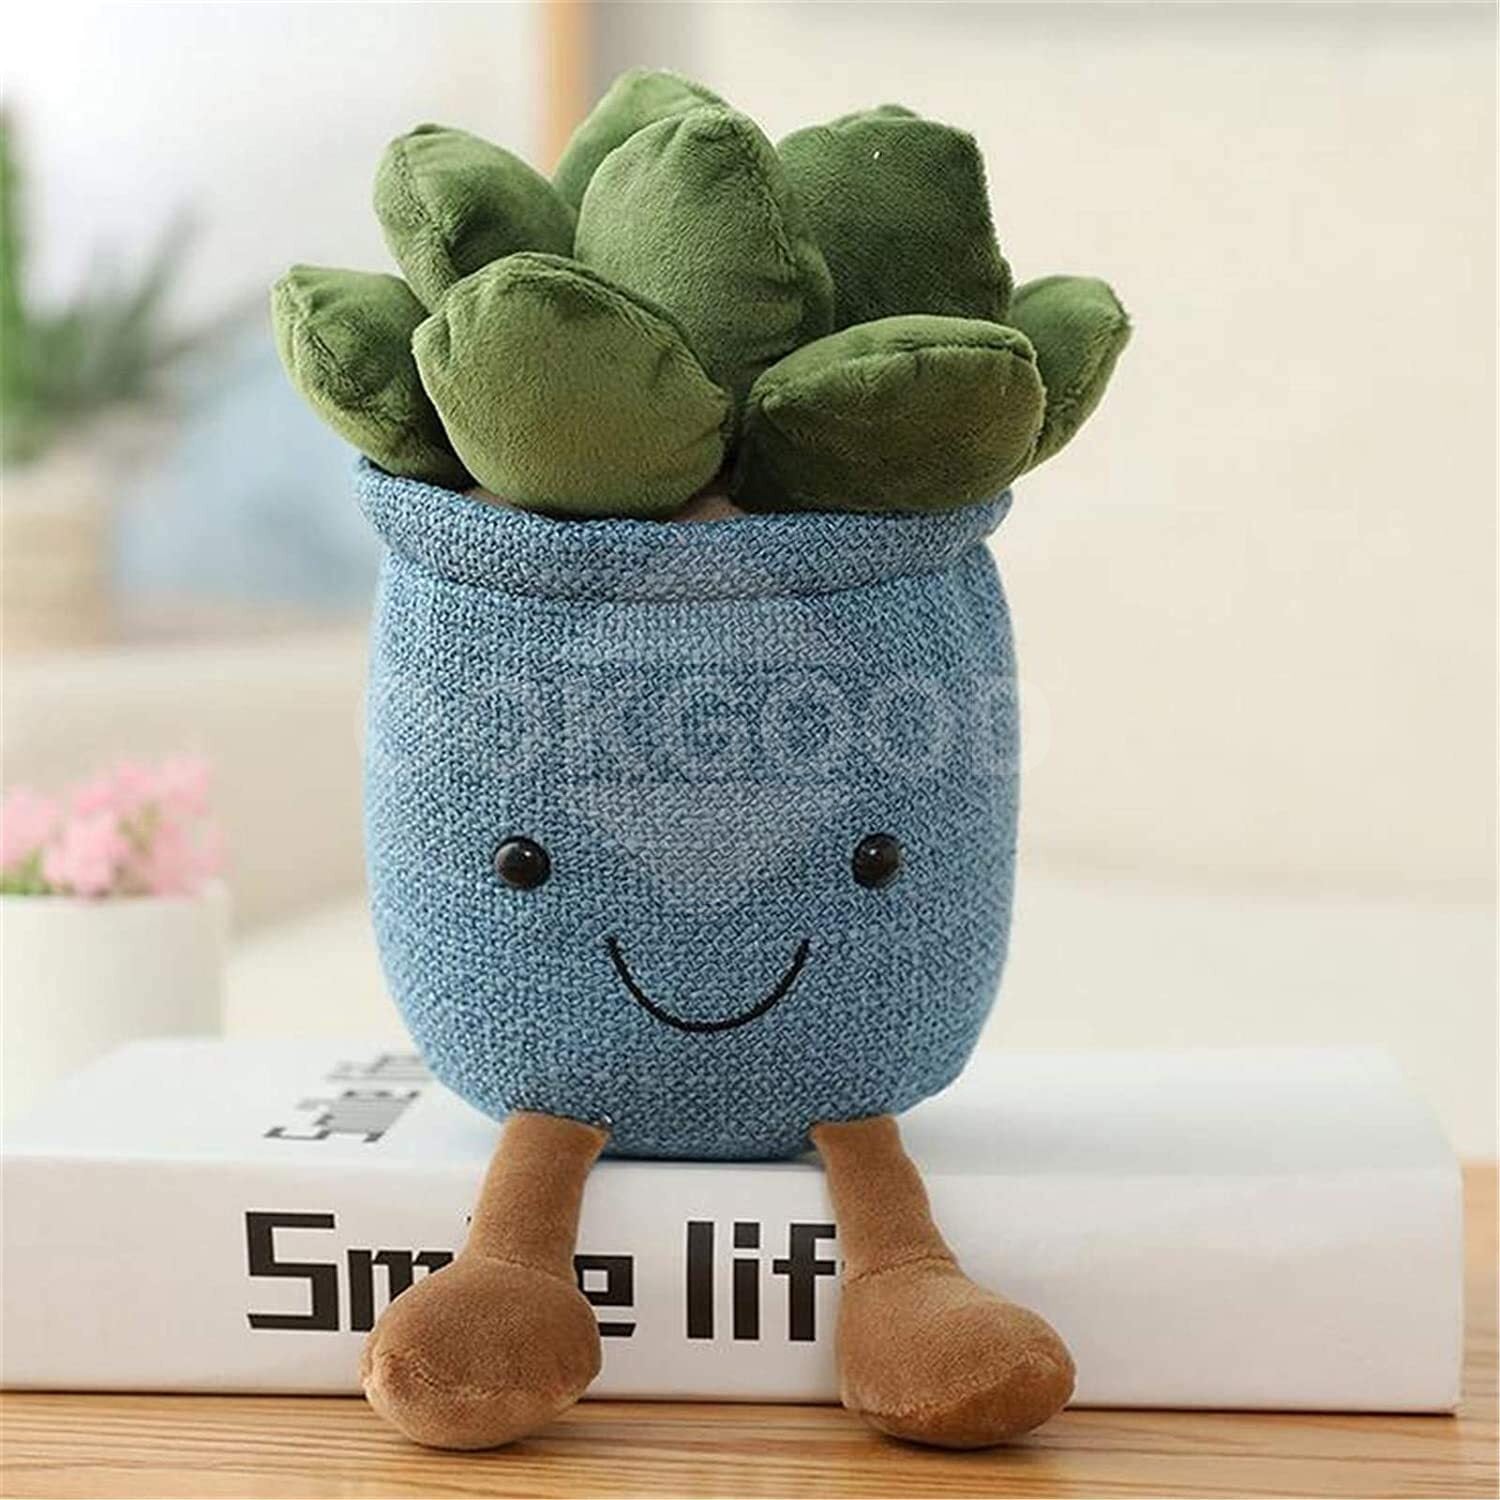 Lovely Plush Tulip And Succulent Dolls For Home Decoration